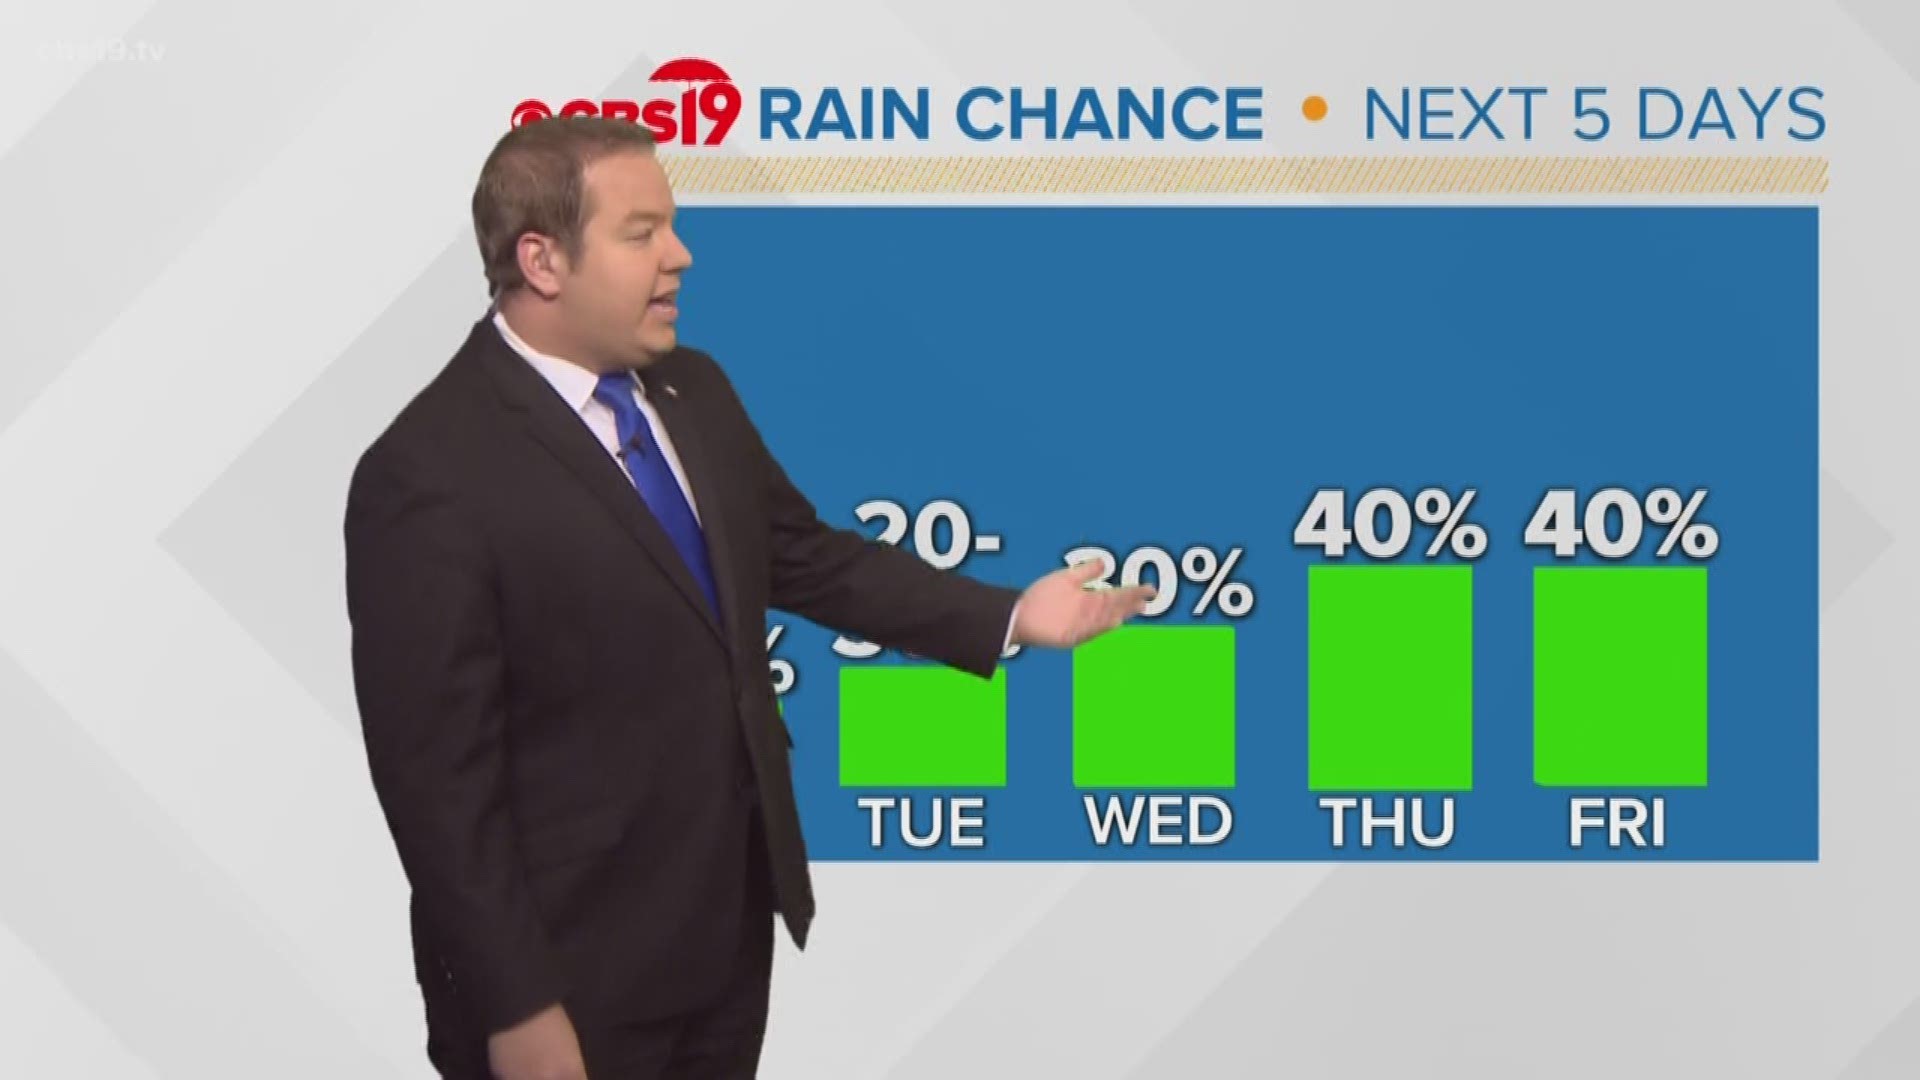 Our temps will be on the down trend later this week as our rain chances rise. Meteorologist Michael Behrens breaks down what to expect!